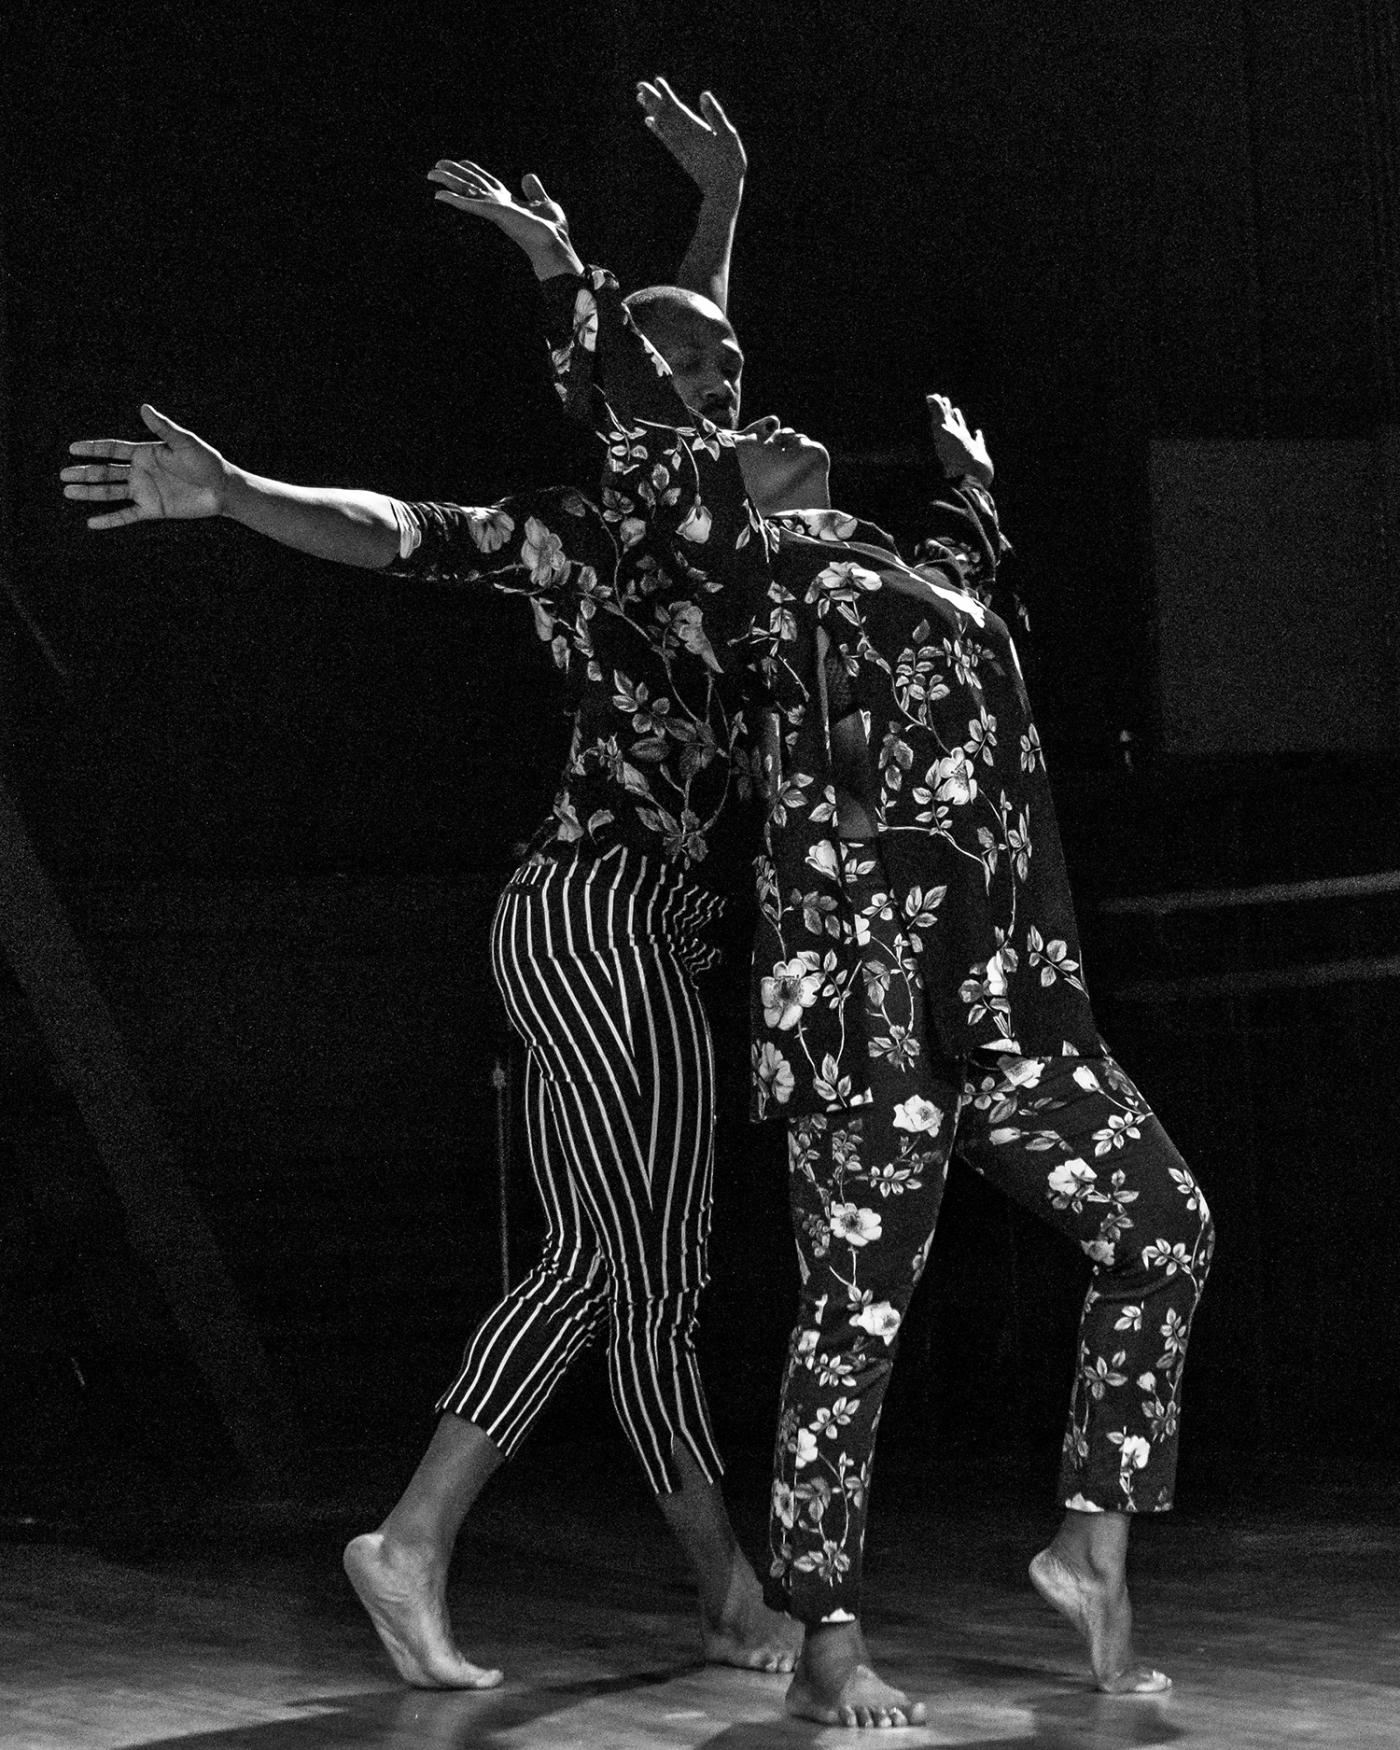 In black and white, two Black dancers perform in floral costumes.